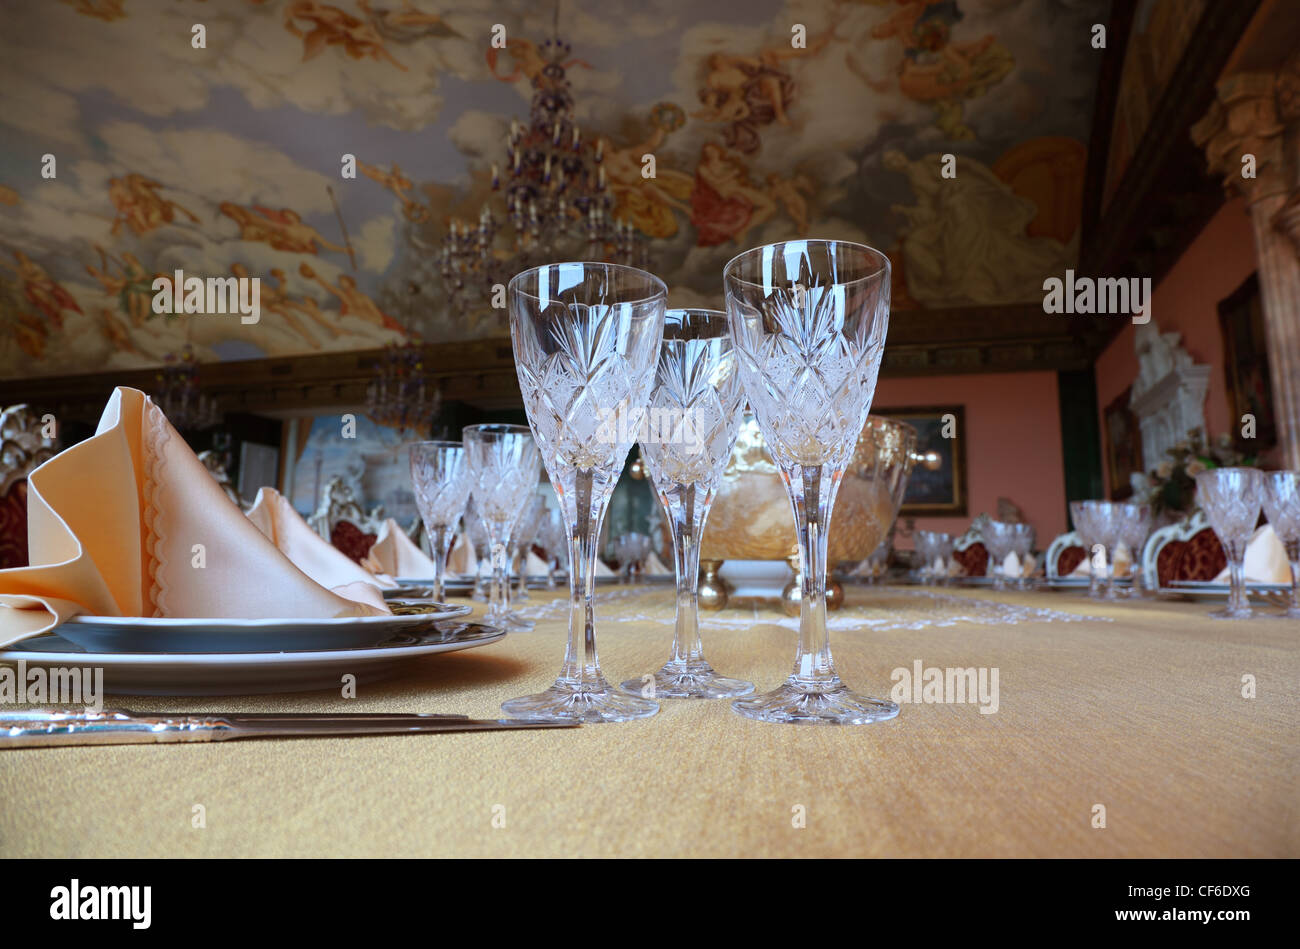 Three cut-glass gobles stand on big dinner table near knives and plates with placemats Stock Photo